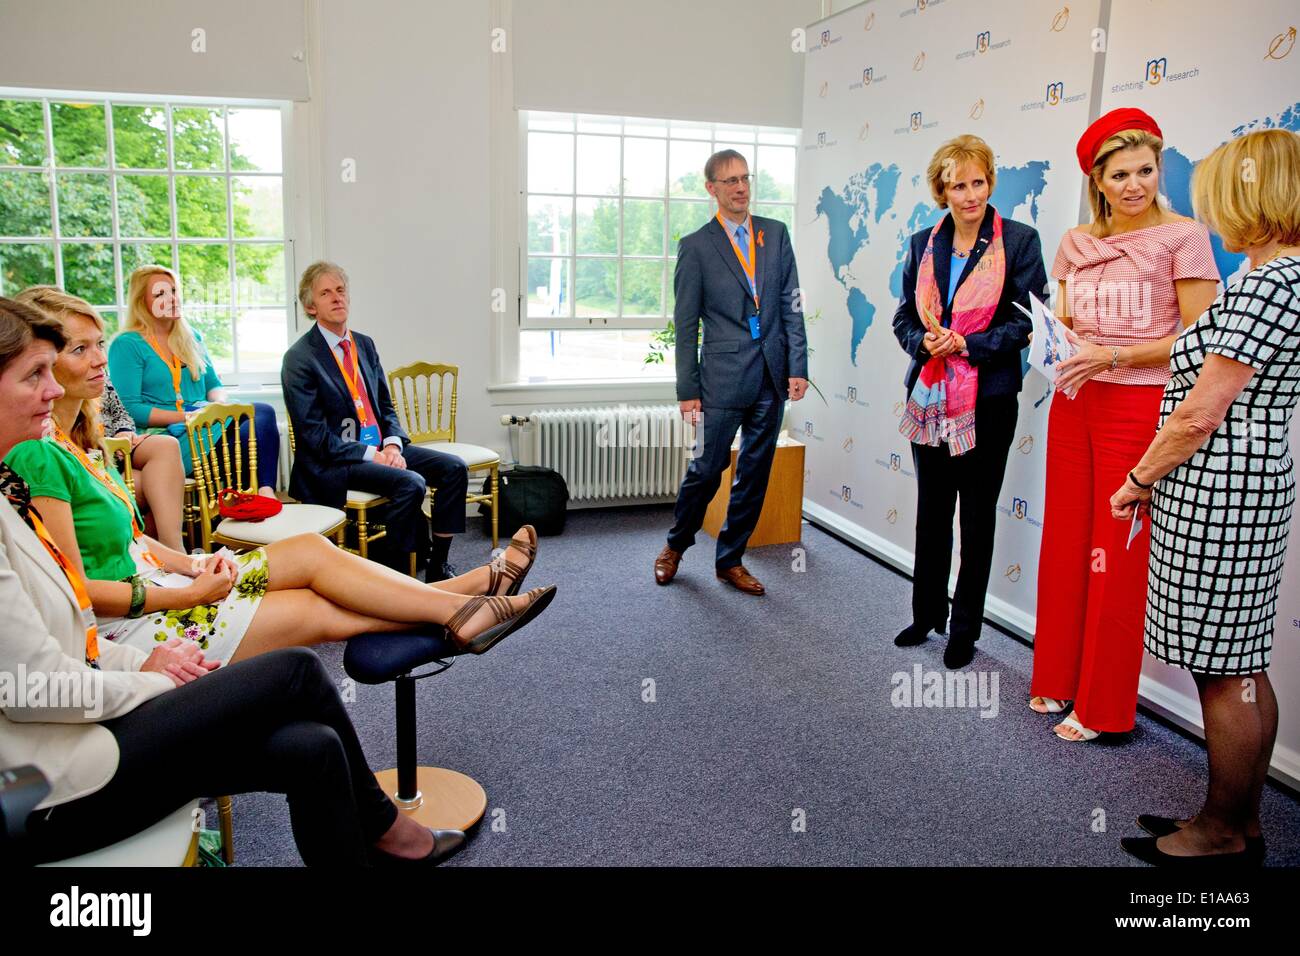 Voorschoten, The Netherlands. 28th May, 2014. Queen Maxima (2nd R) visits foundation MS Research at World MS Day in Voorschoten, The Netherlands, 28 May 2014. The Queen received the first Dutch version of the International MS (multiple sclerosis) Atlas from director Dorinda Roos (3rd R). Photo: Patrick van Katwijk /NO WIRE SERVICE/dpa/Alamy Live News Stock Photo